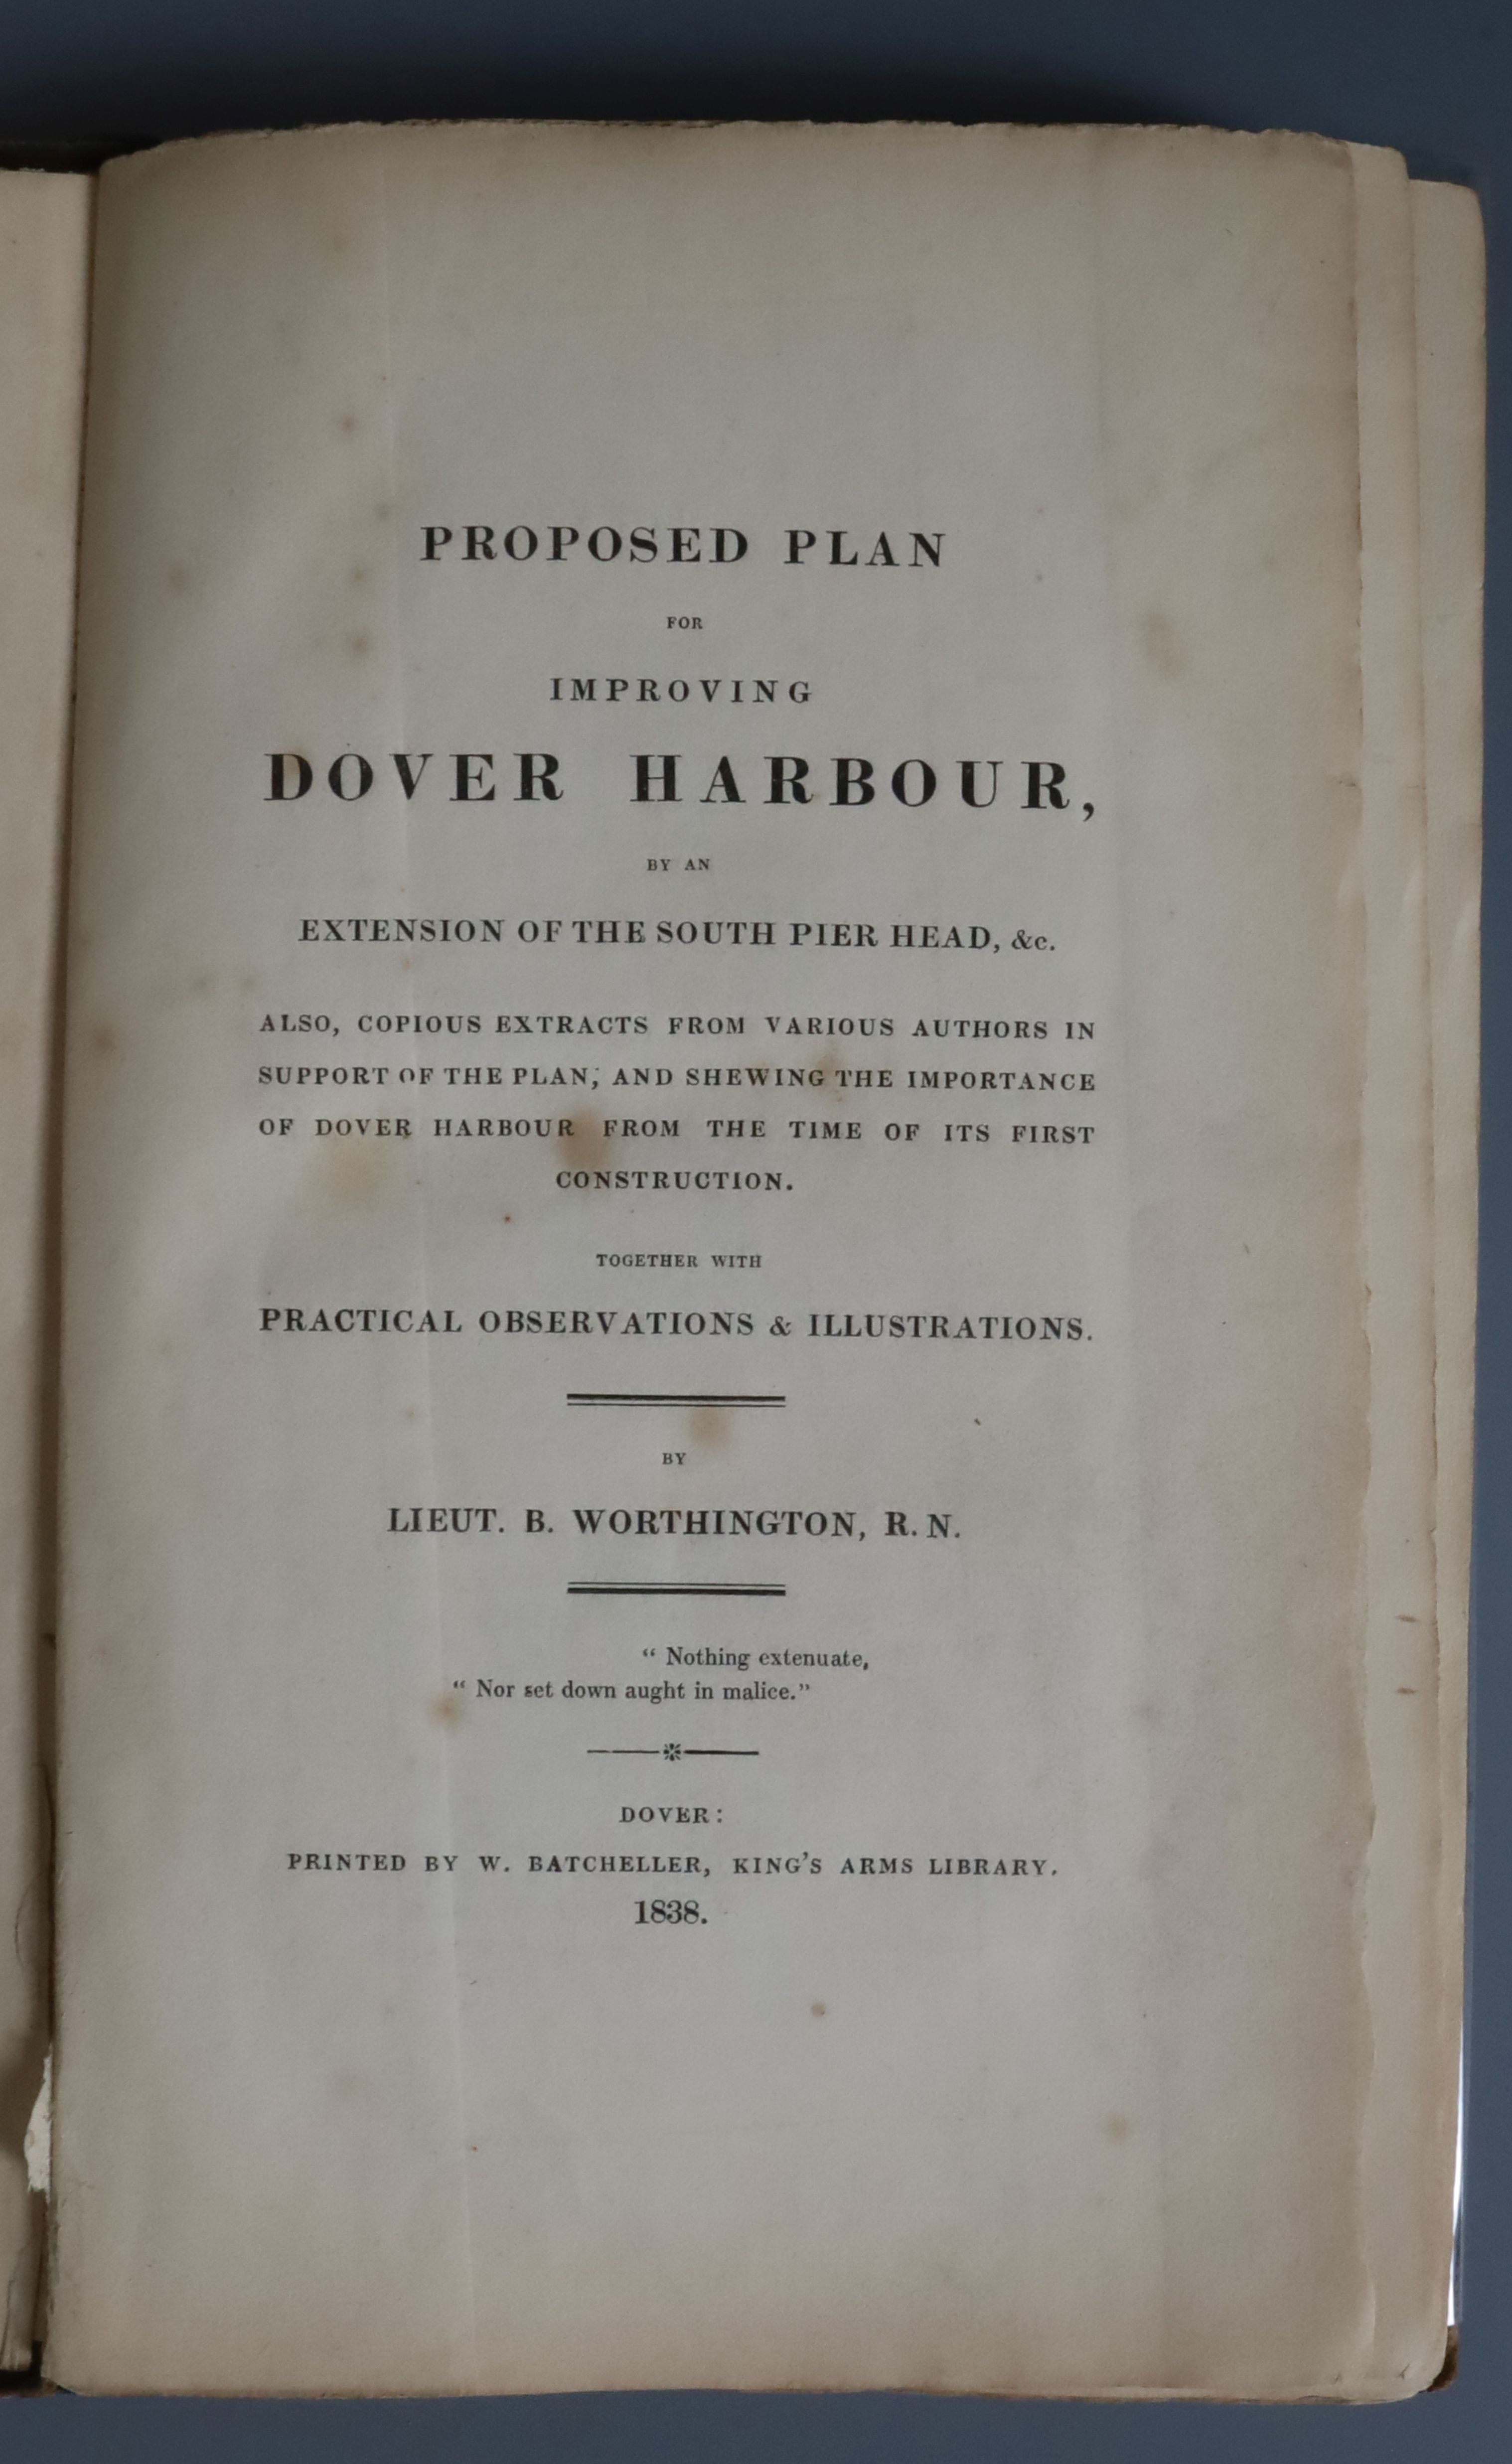 Worthington, Lieut. B - Proposed Plan for Improving Dover Harbour, qto, original cloth, with folding